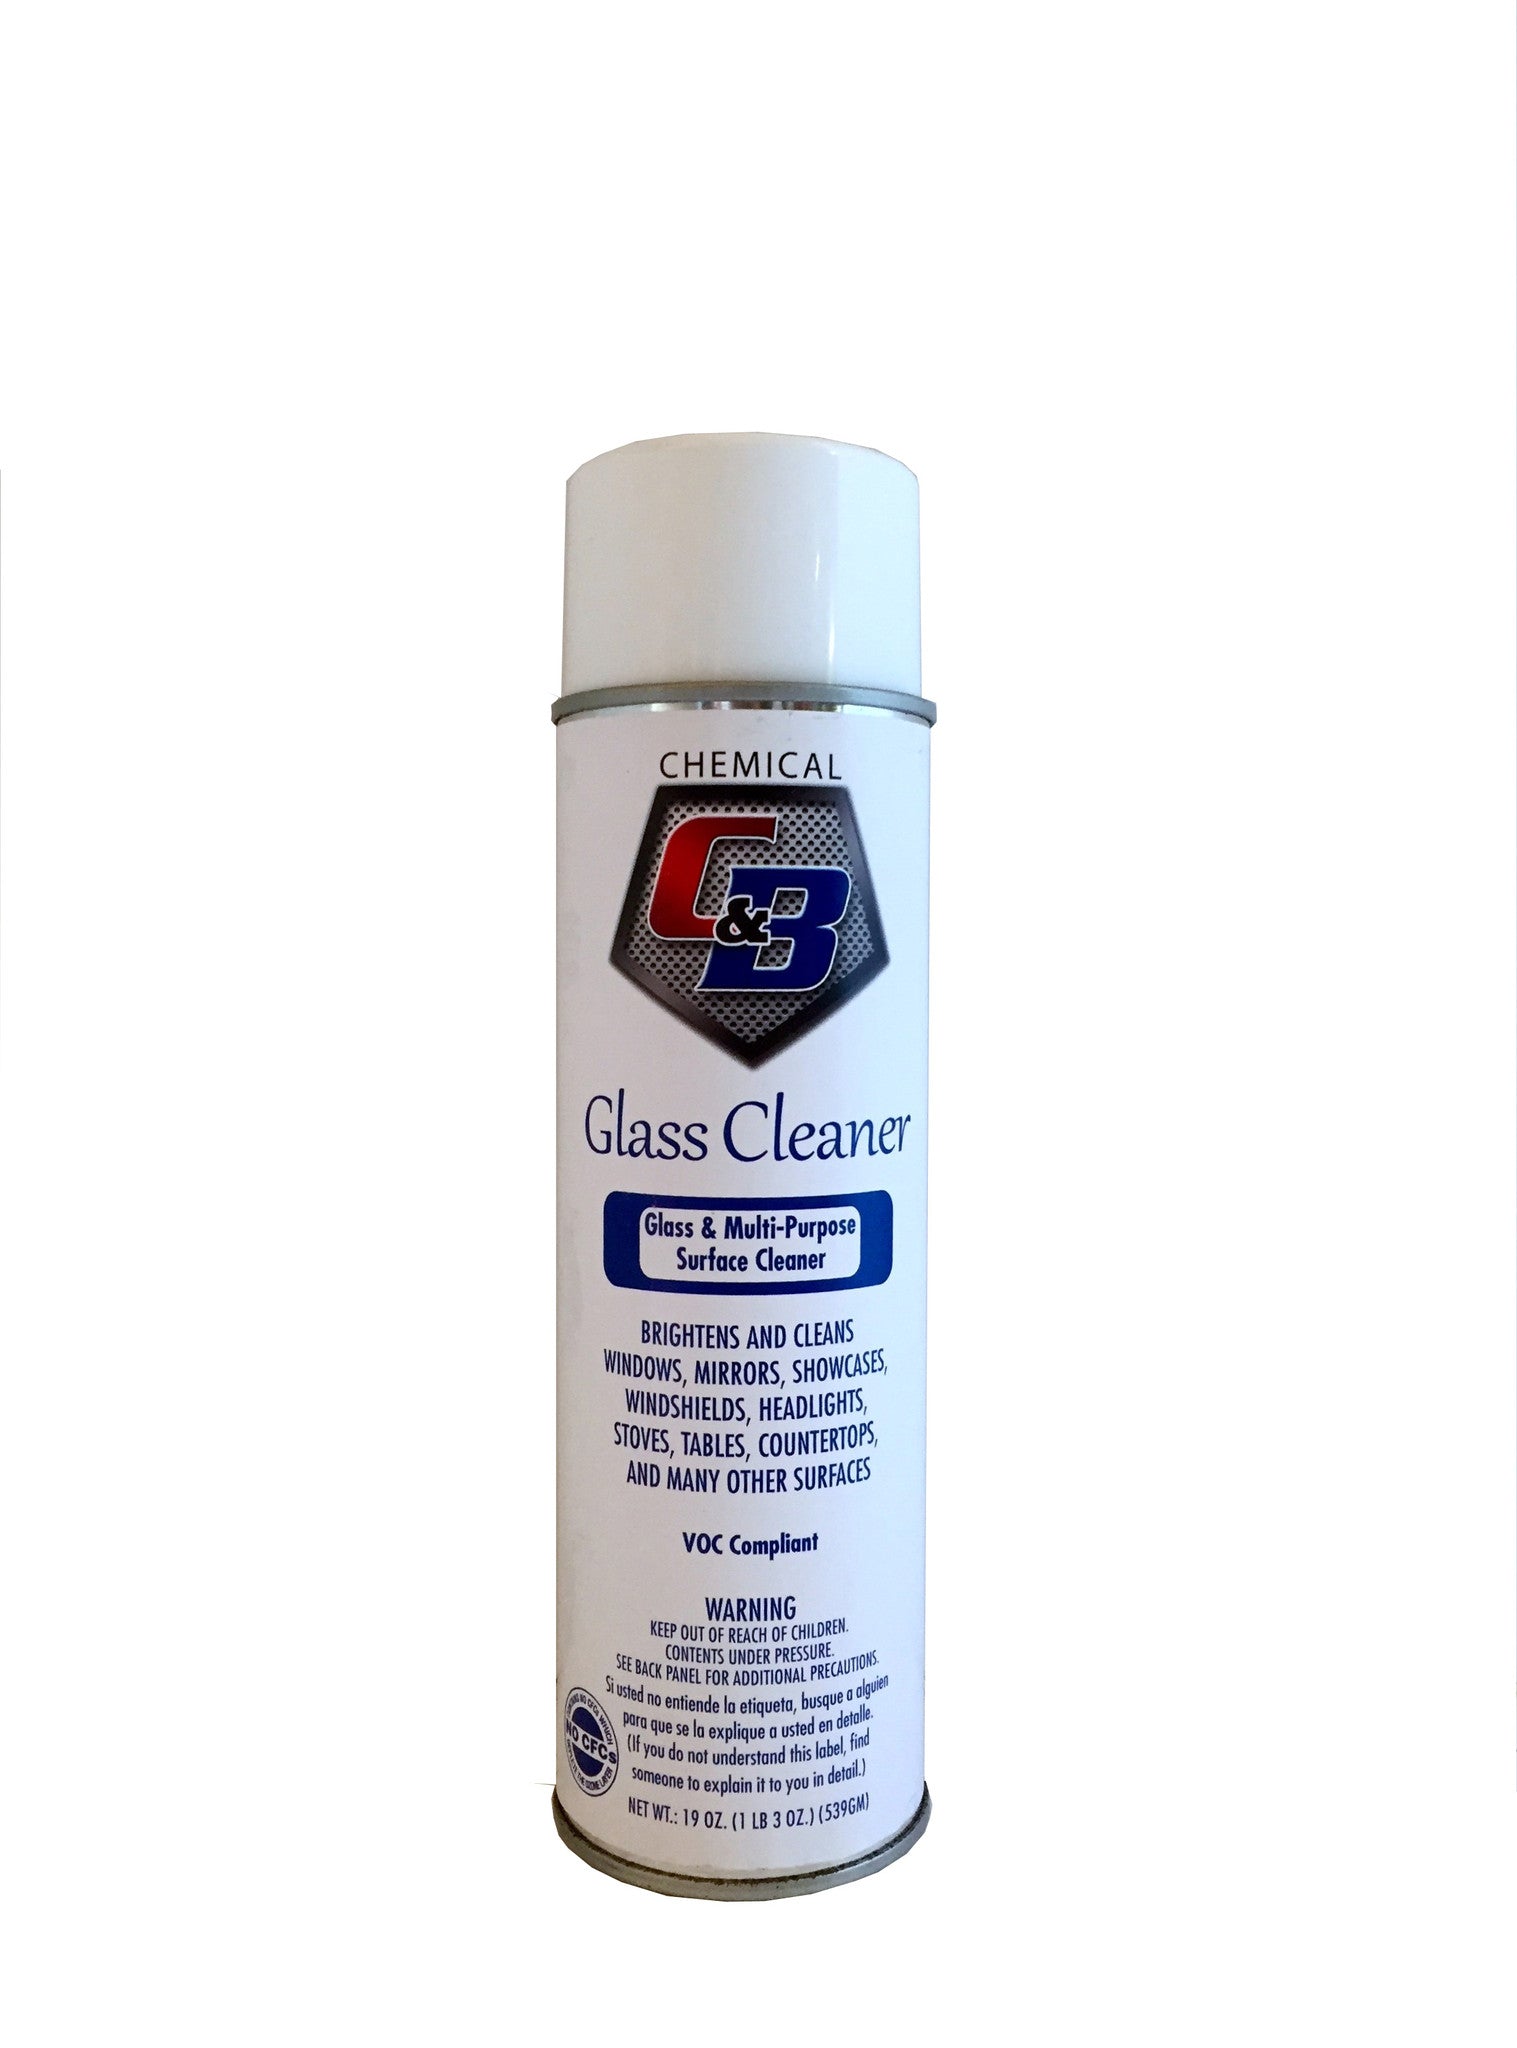 Glass & Multi-Purpose Surface Cleaner – C & B Chemical, Inc